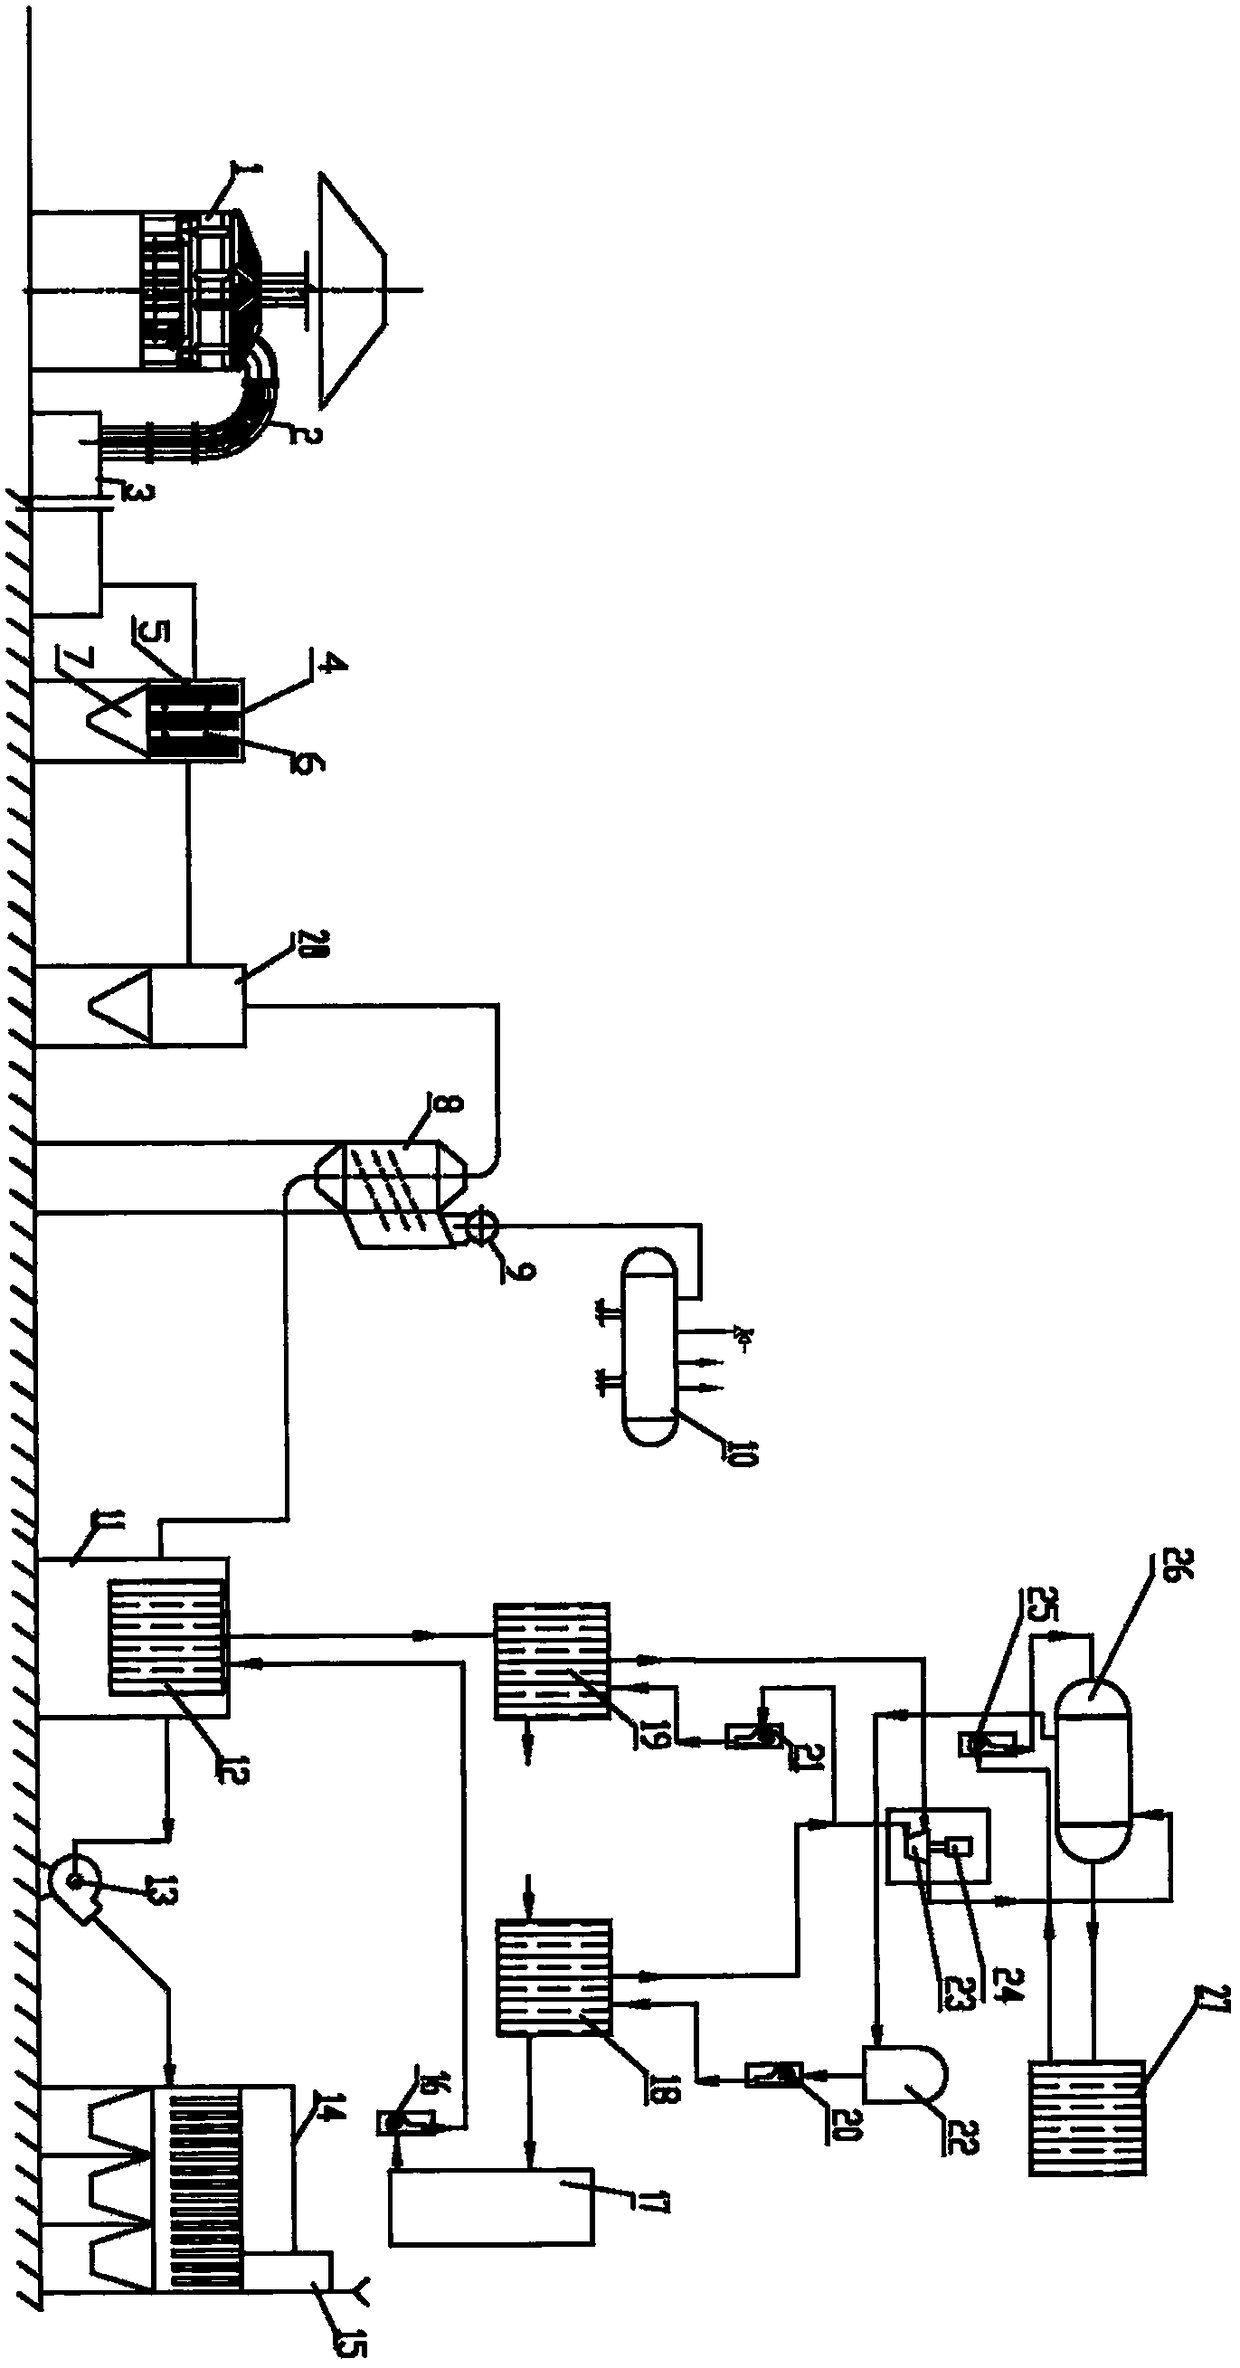 Flue gas residual heat utilizing method for copper smelting furnace through dust remover with exhaust funnel